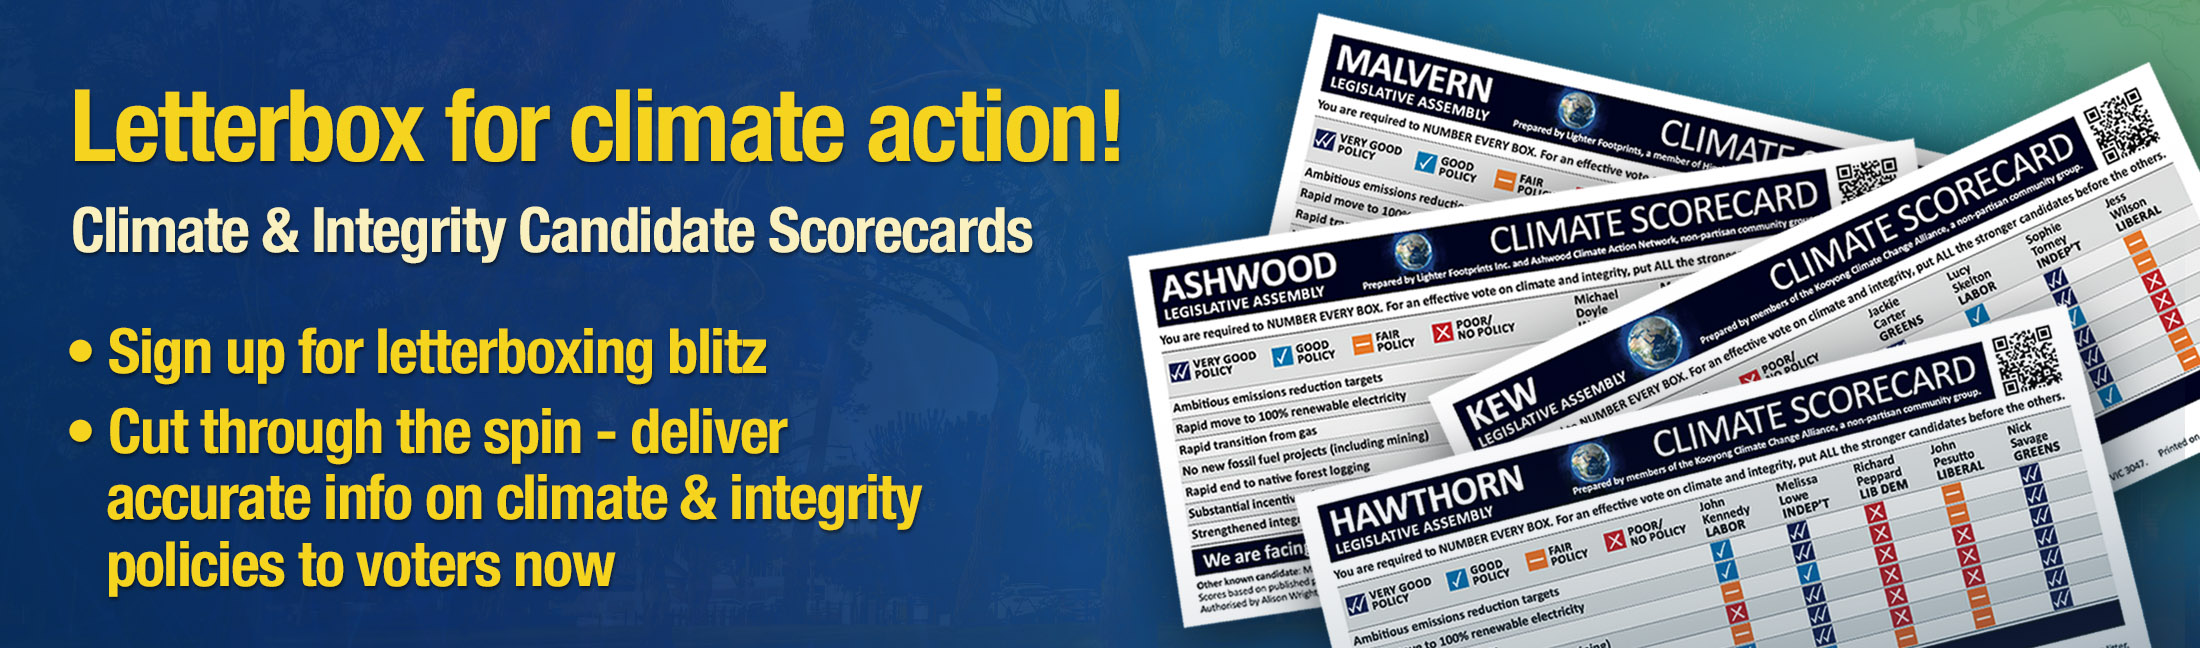 Letterbox Climate and Integrity Candidate Scorecard